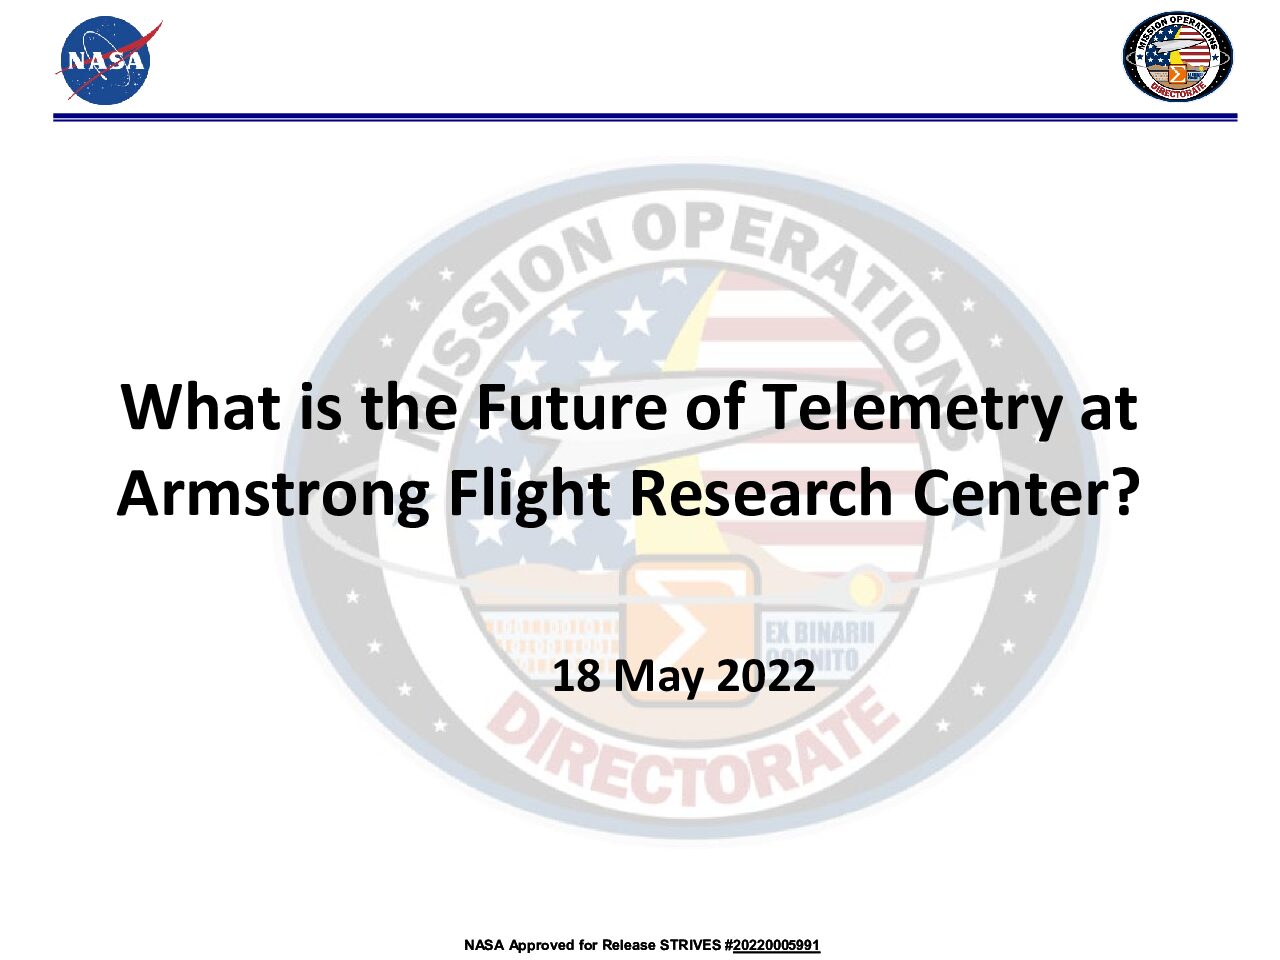 5-4_Young_Future of TM at AFRC May 2022